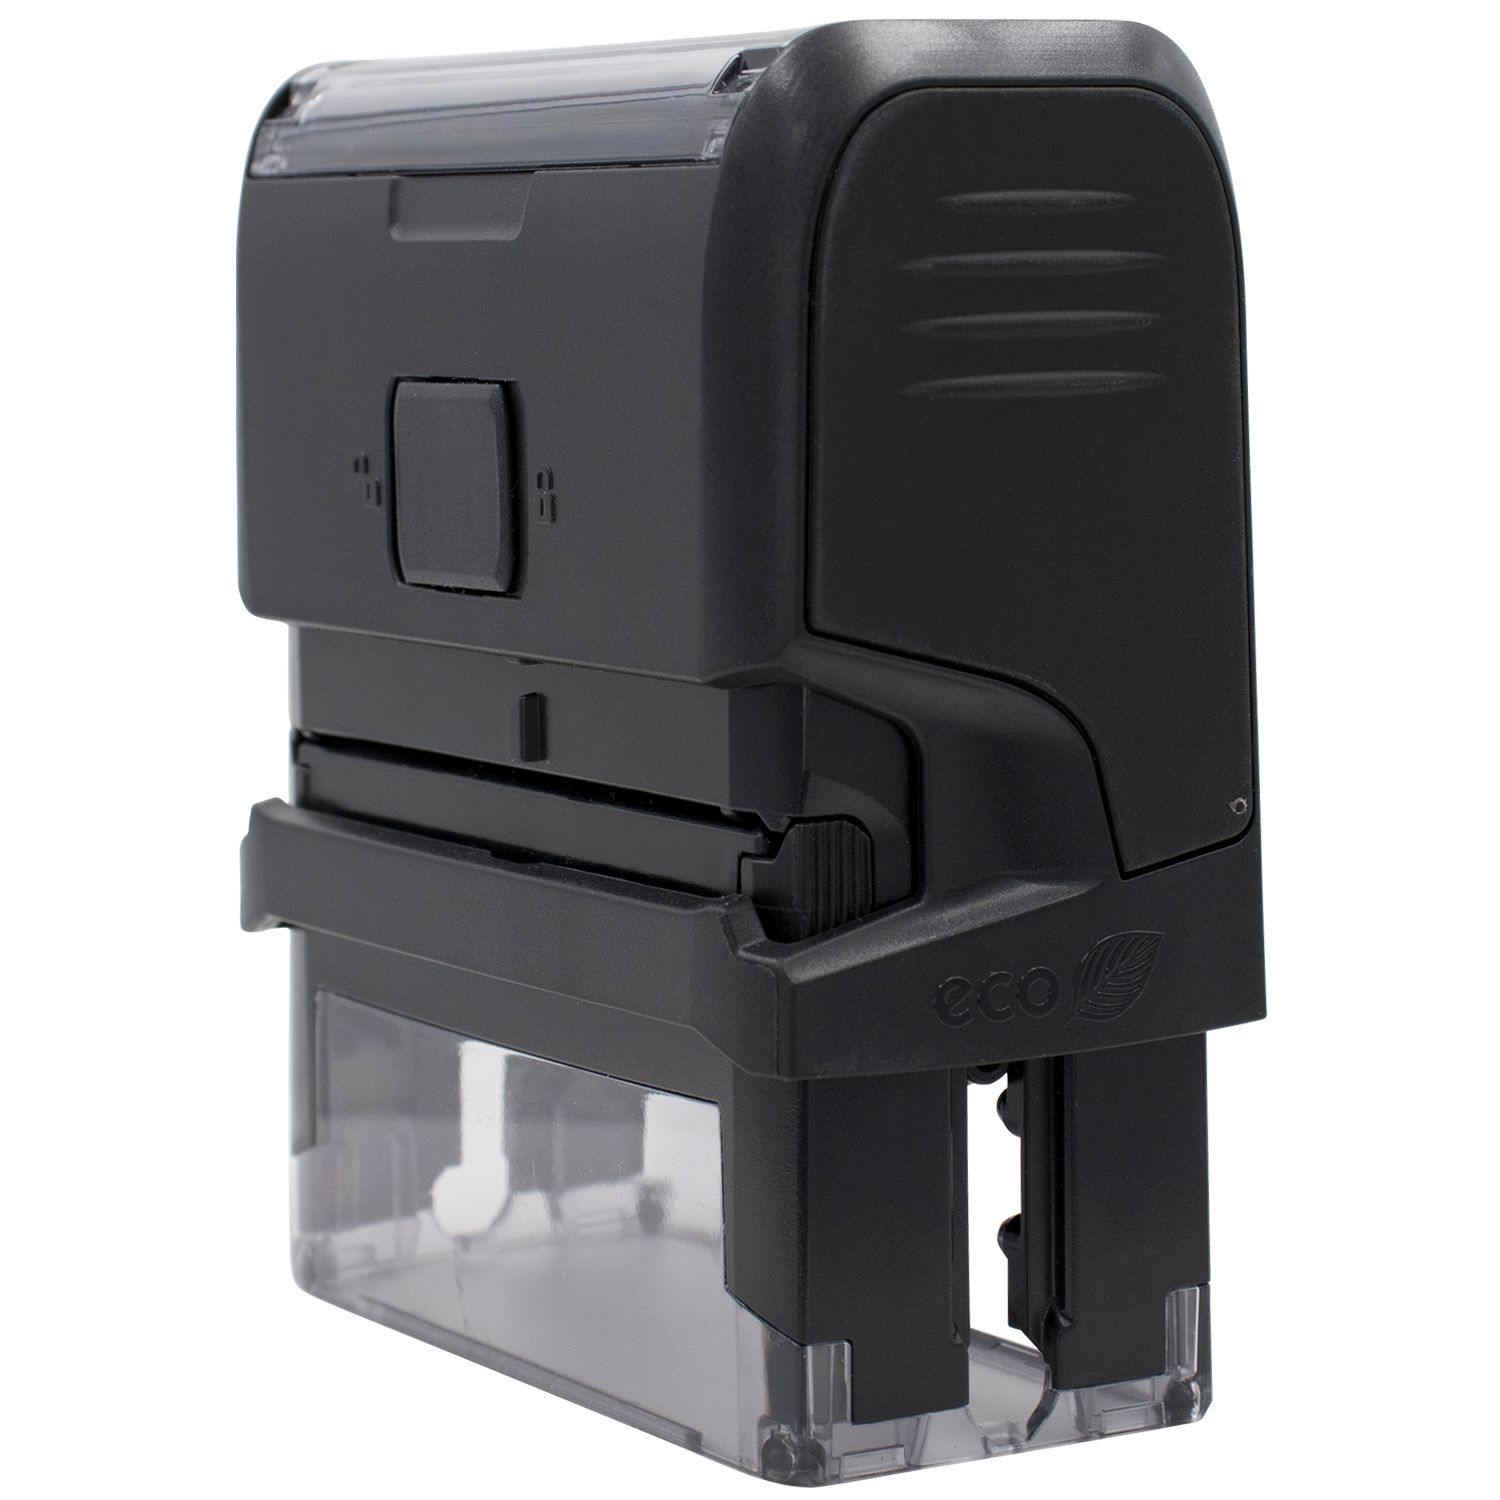 Side View of Large Self Inking Balanced Stamp at an Angle